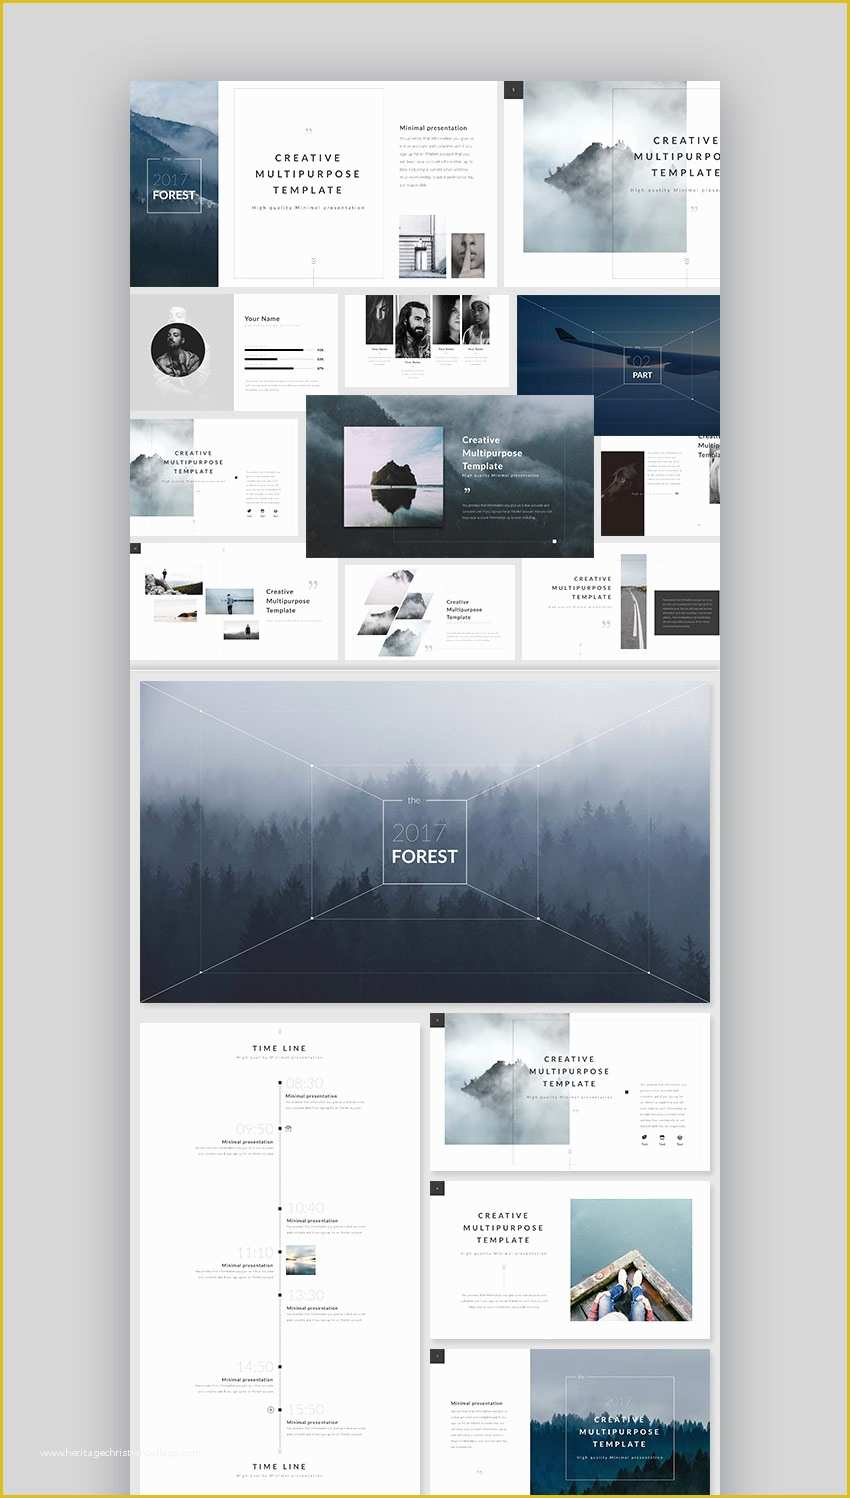 Free Powerpoint Templates for Mac 2017 Of the Best New Presentation Templates Of 2017 Powerpoint